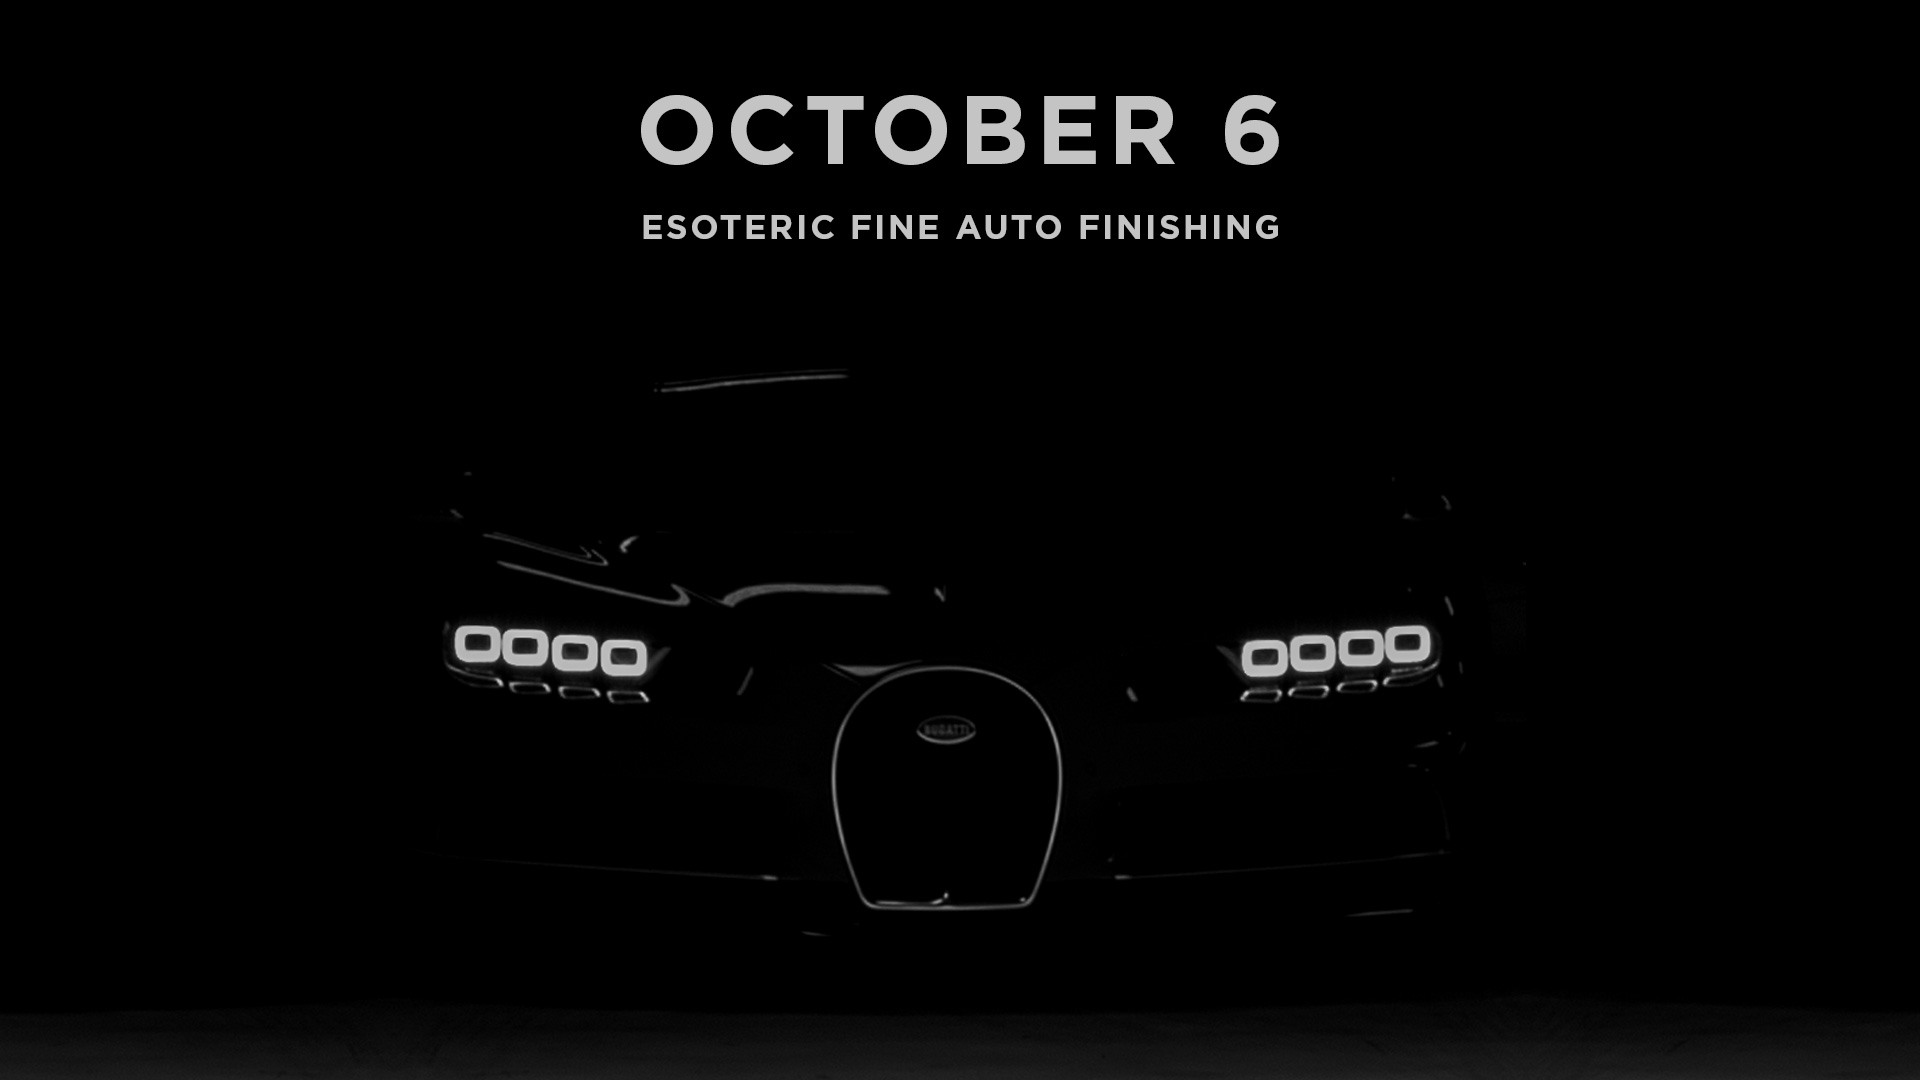 columbus cars and coffee esoteric october